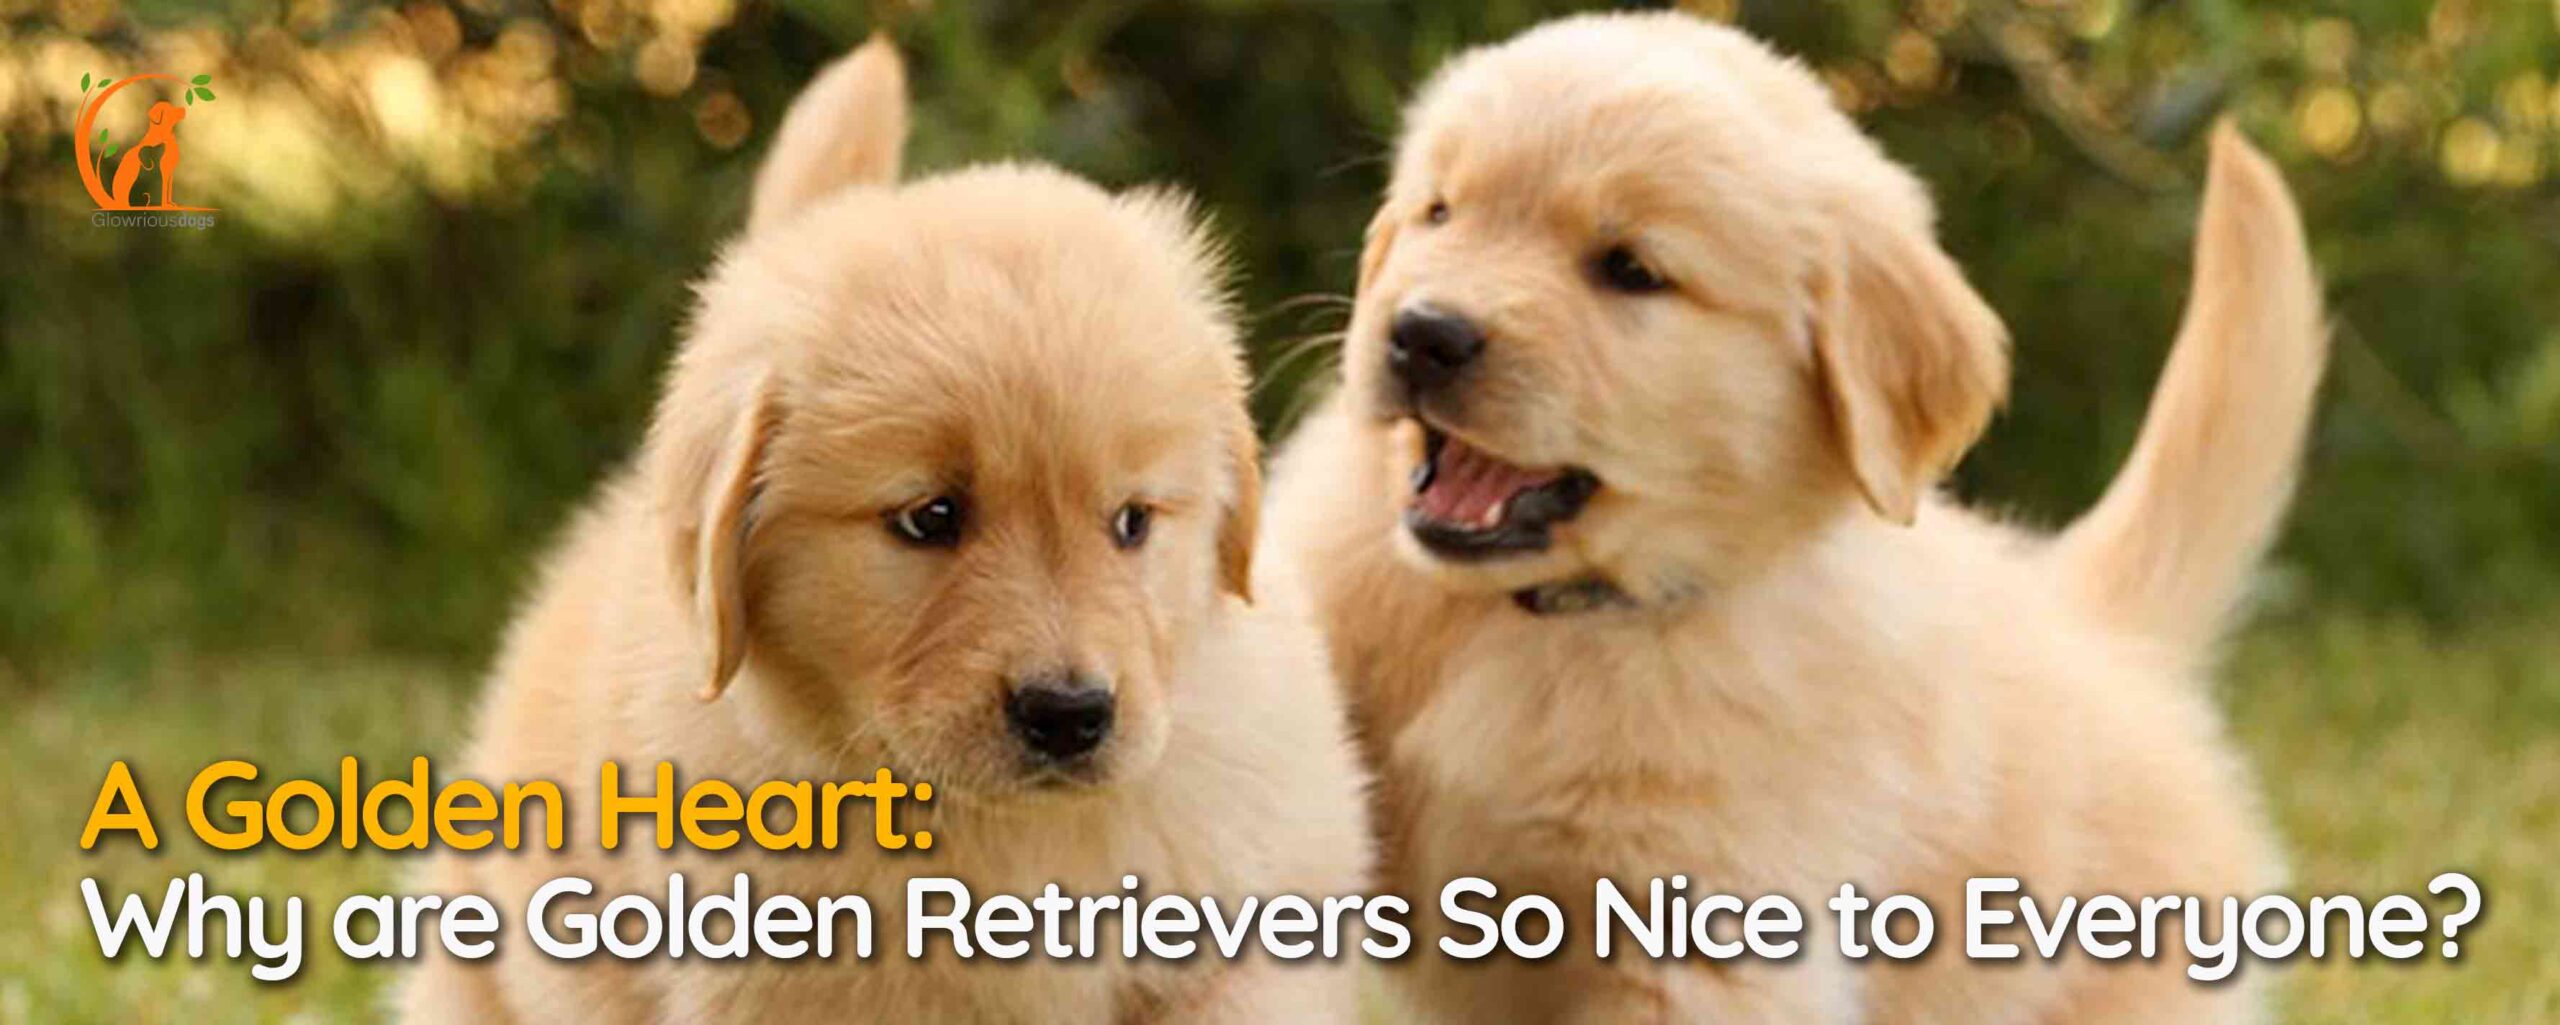 A Golden Heart: Why are Golden Retrievers So Nice to Everyone?